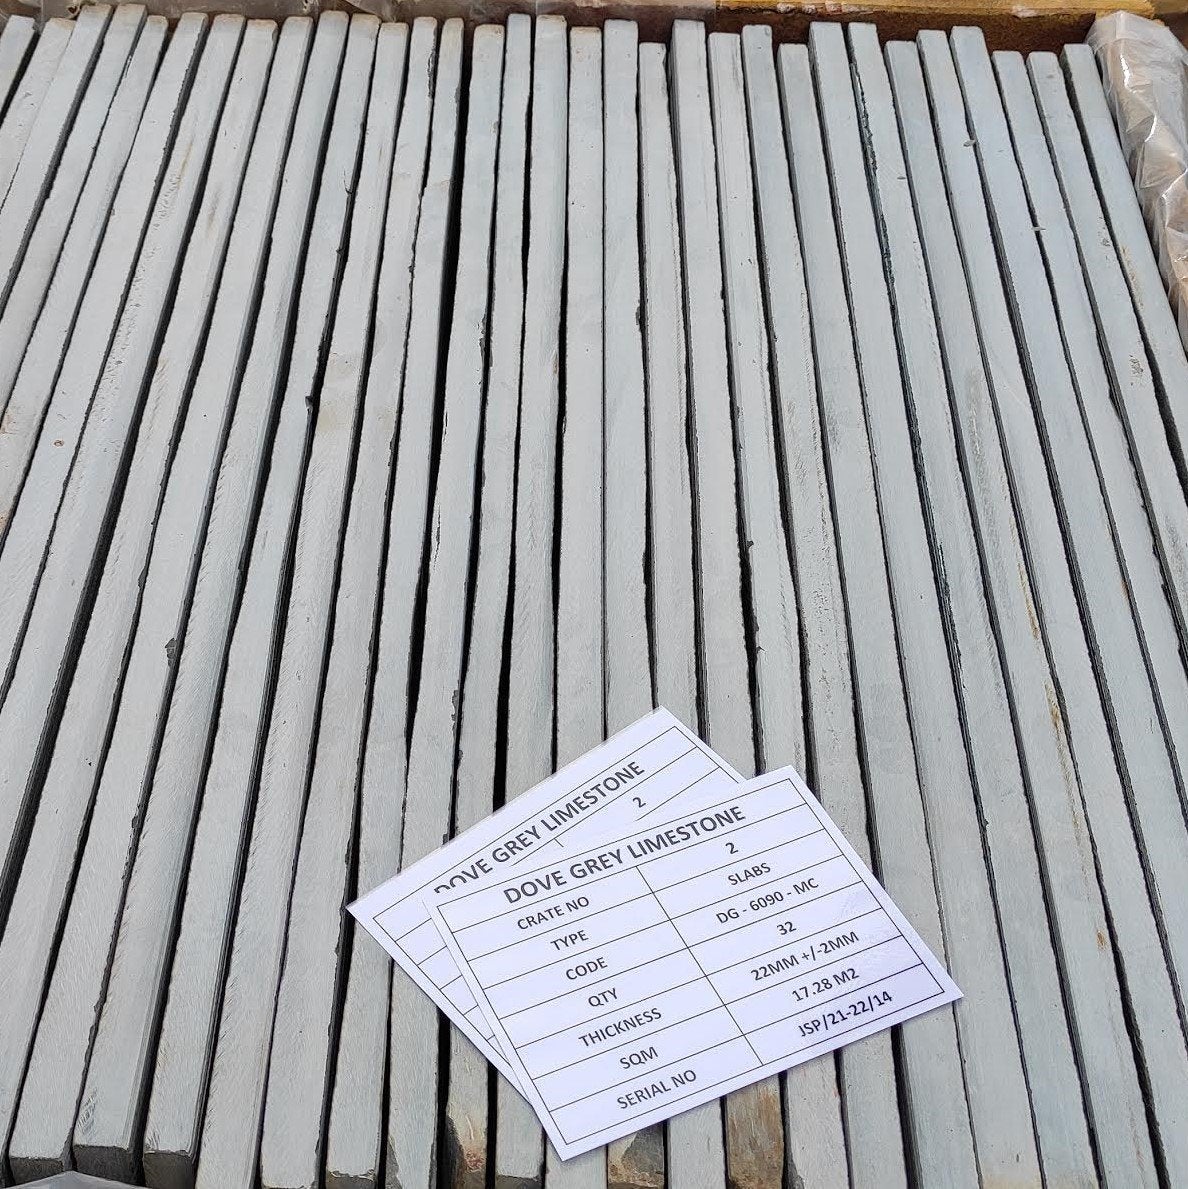 Dove grey limestone slabs in crate showing edge 